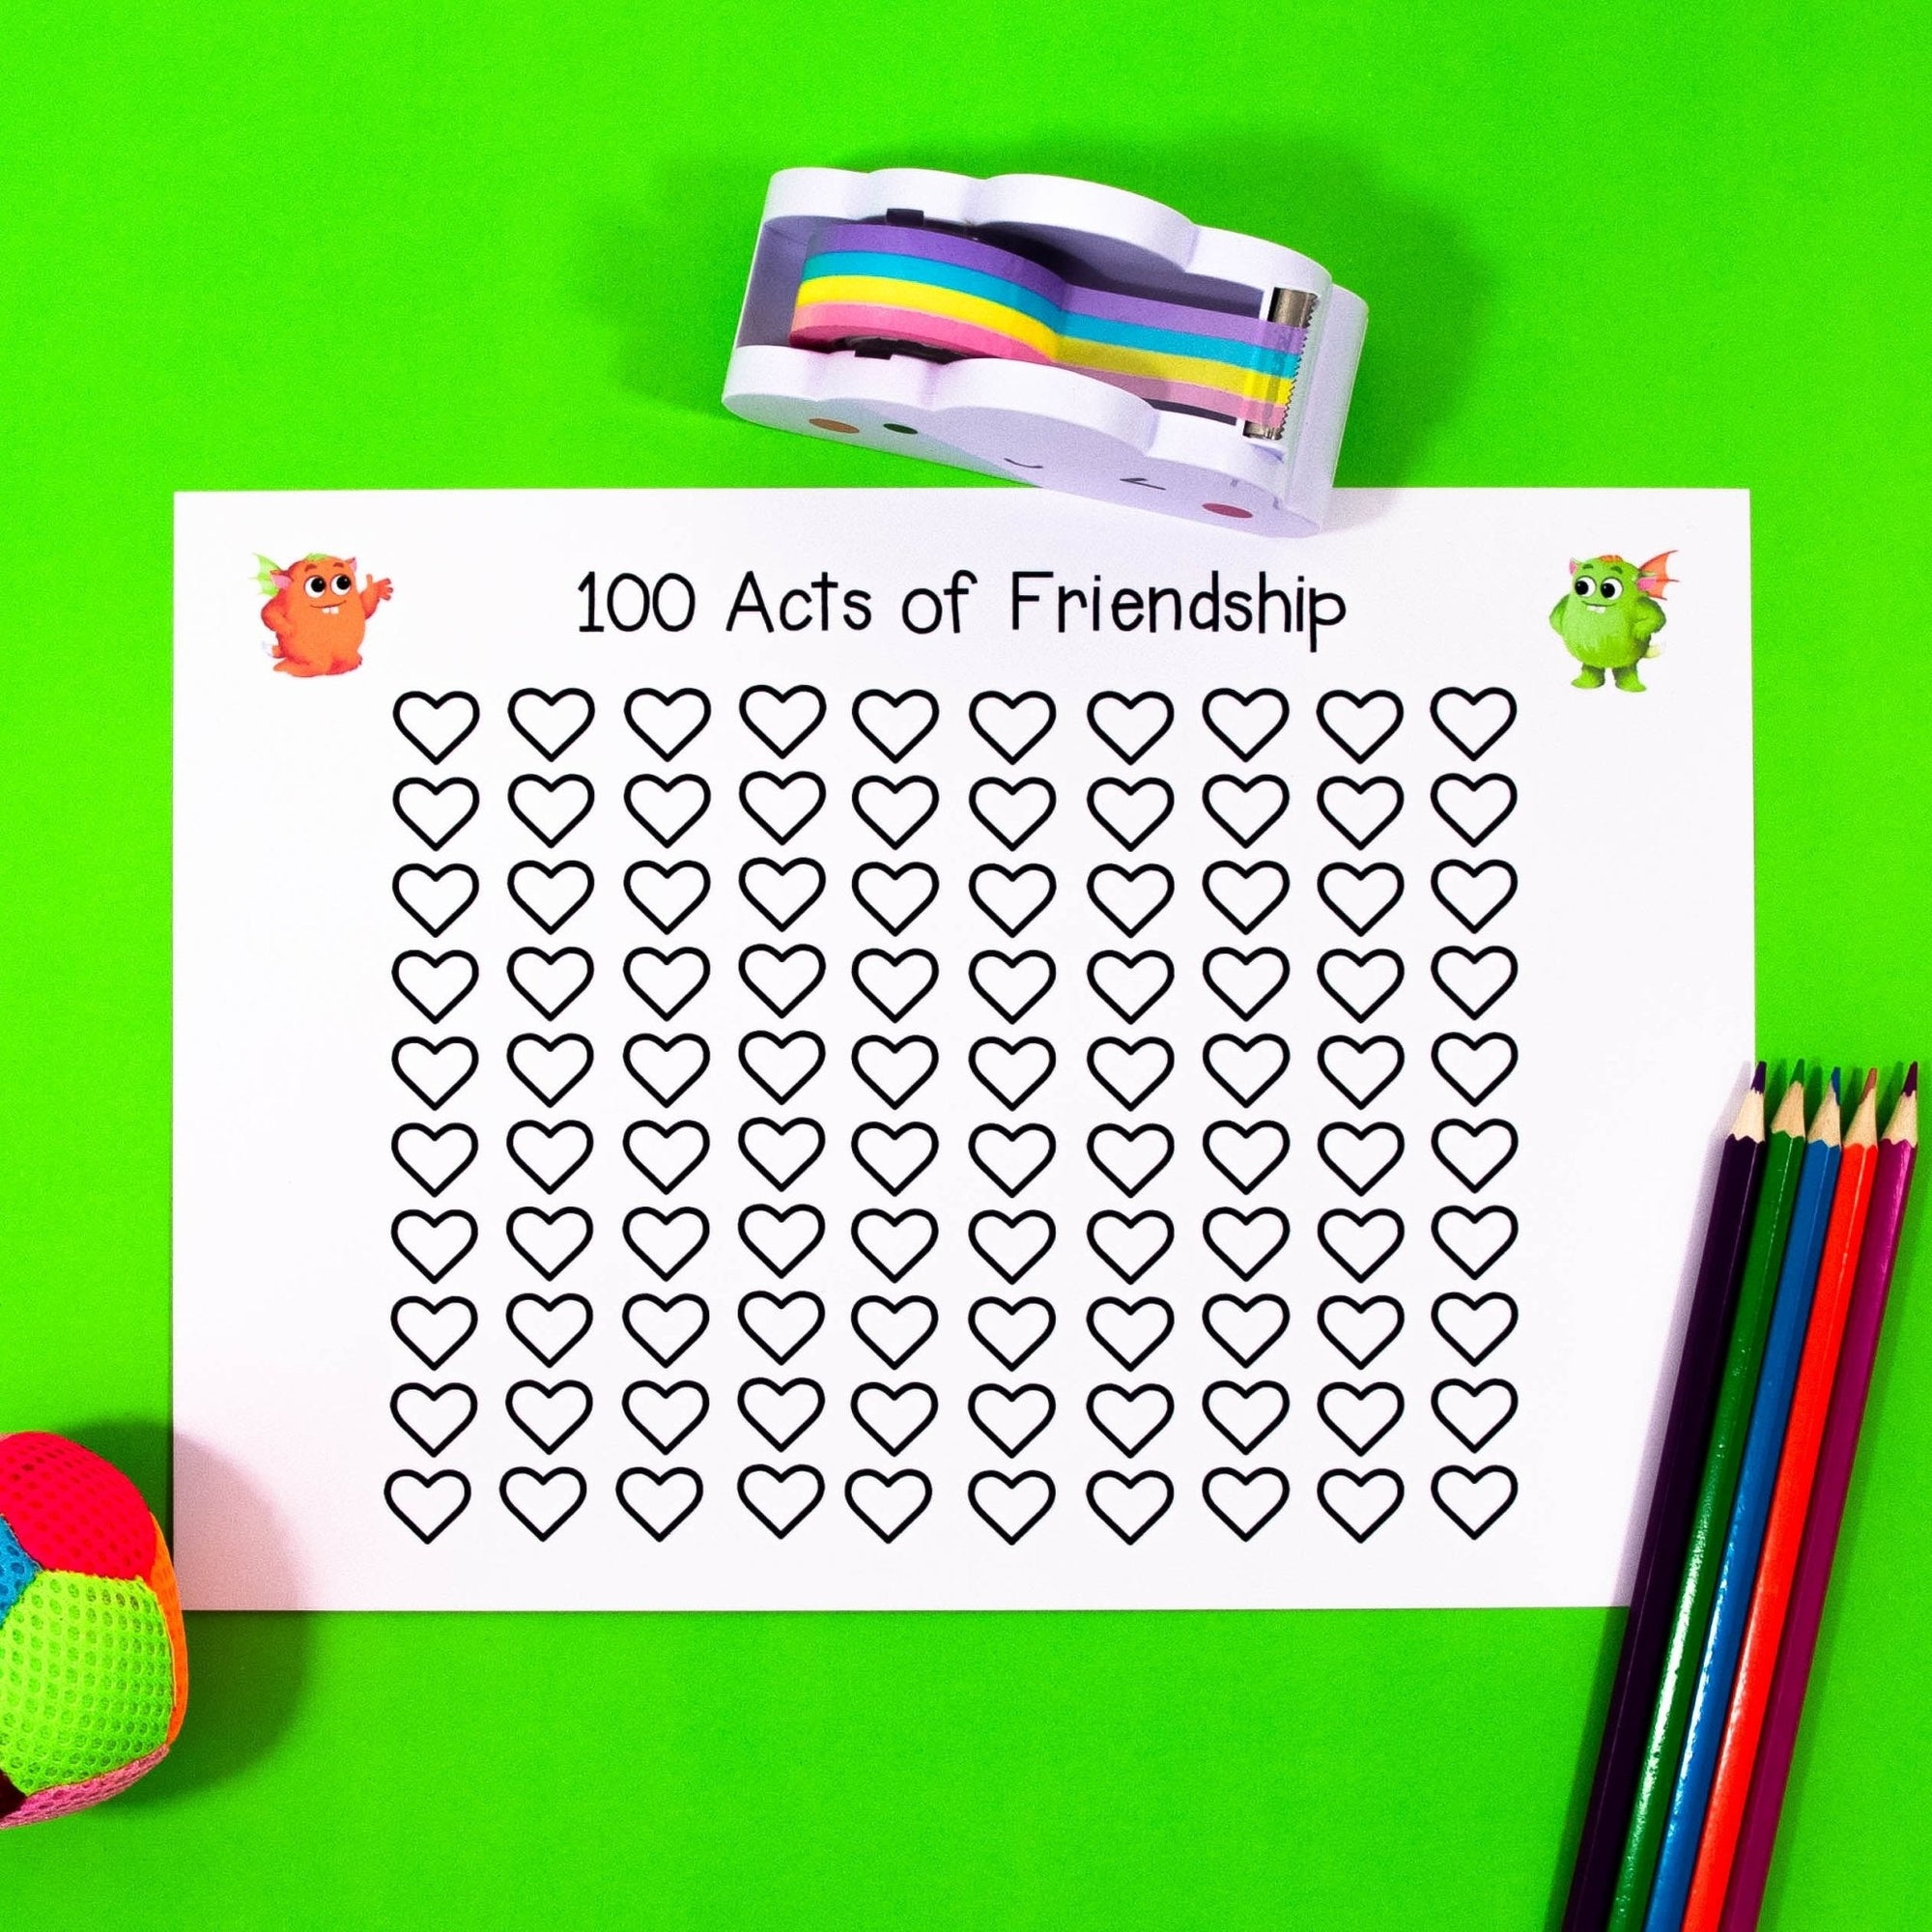 100 Acts Of Kindness Chart & 100 Acts Of Friendship Chart - Your Teacher's Pet Creature